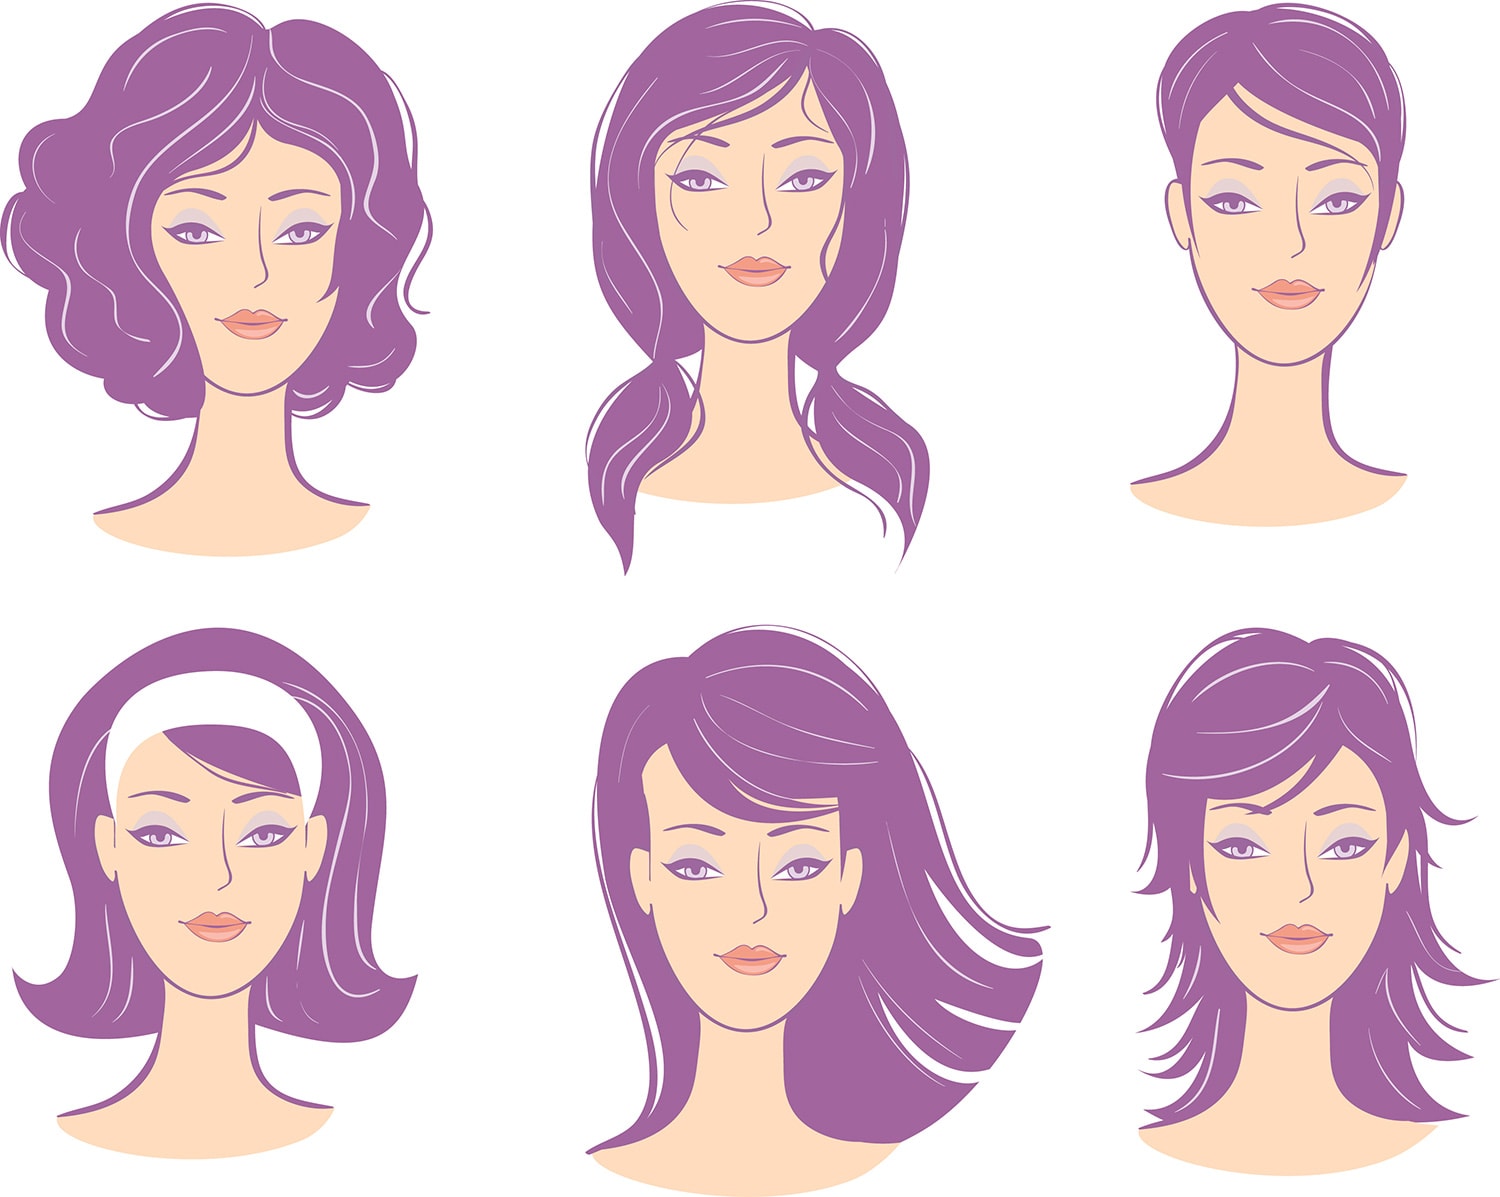 Give you hairstyle advice for your face shape by Styleonlyforyou | Fiverr